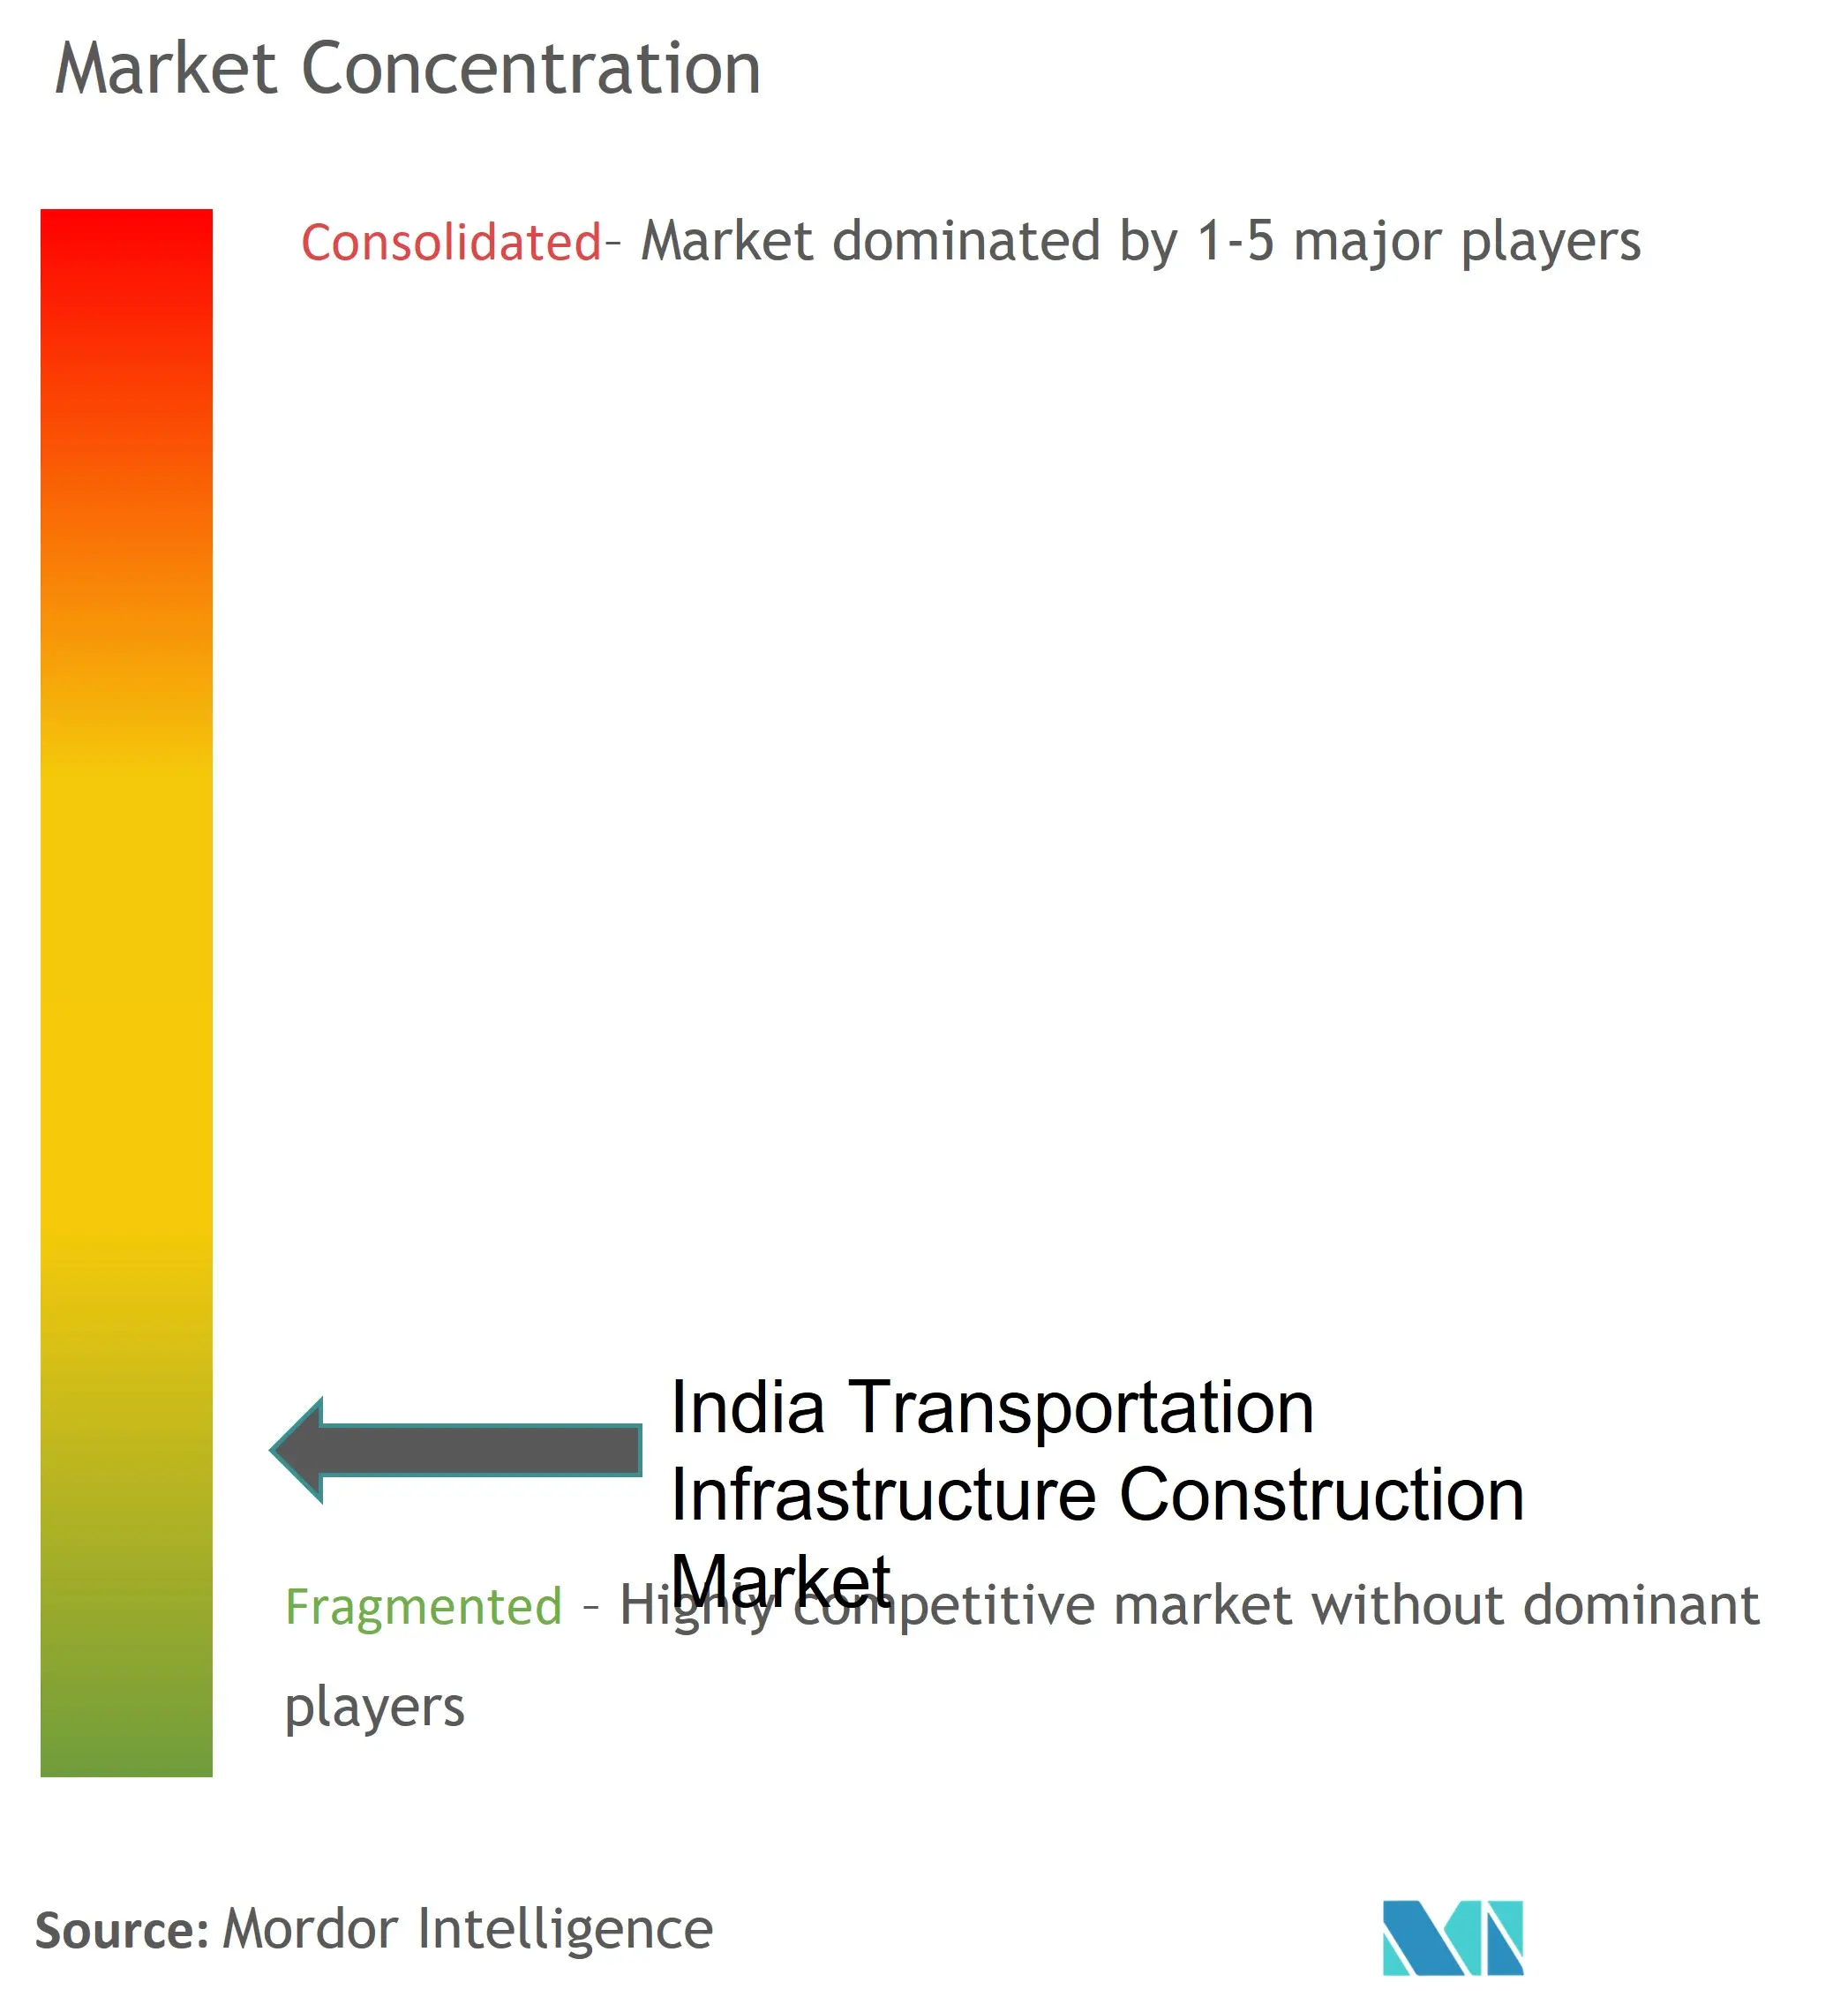 India Transportation Infrastructure Construction Market Concentration